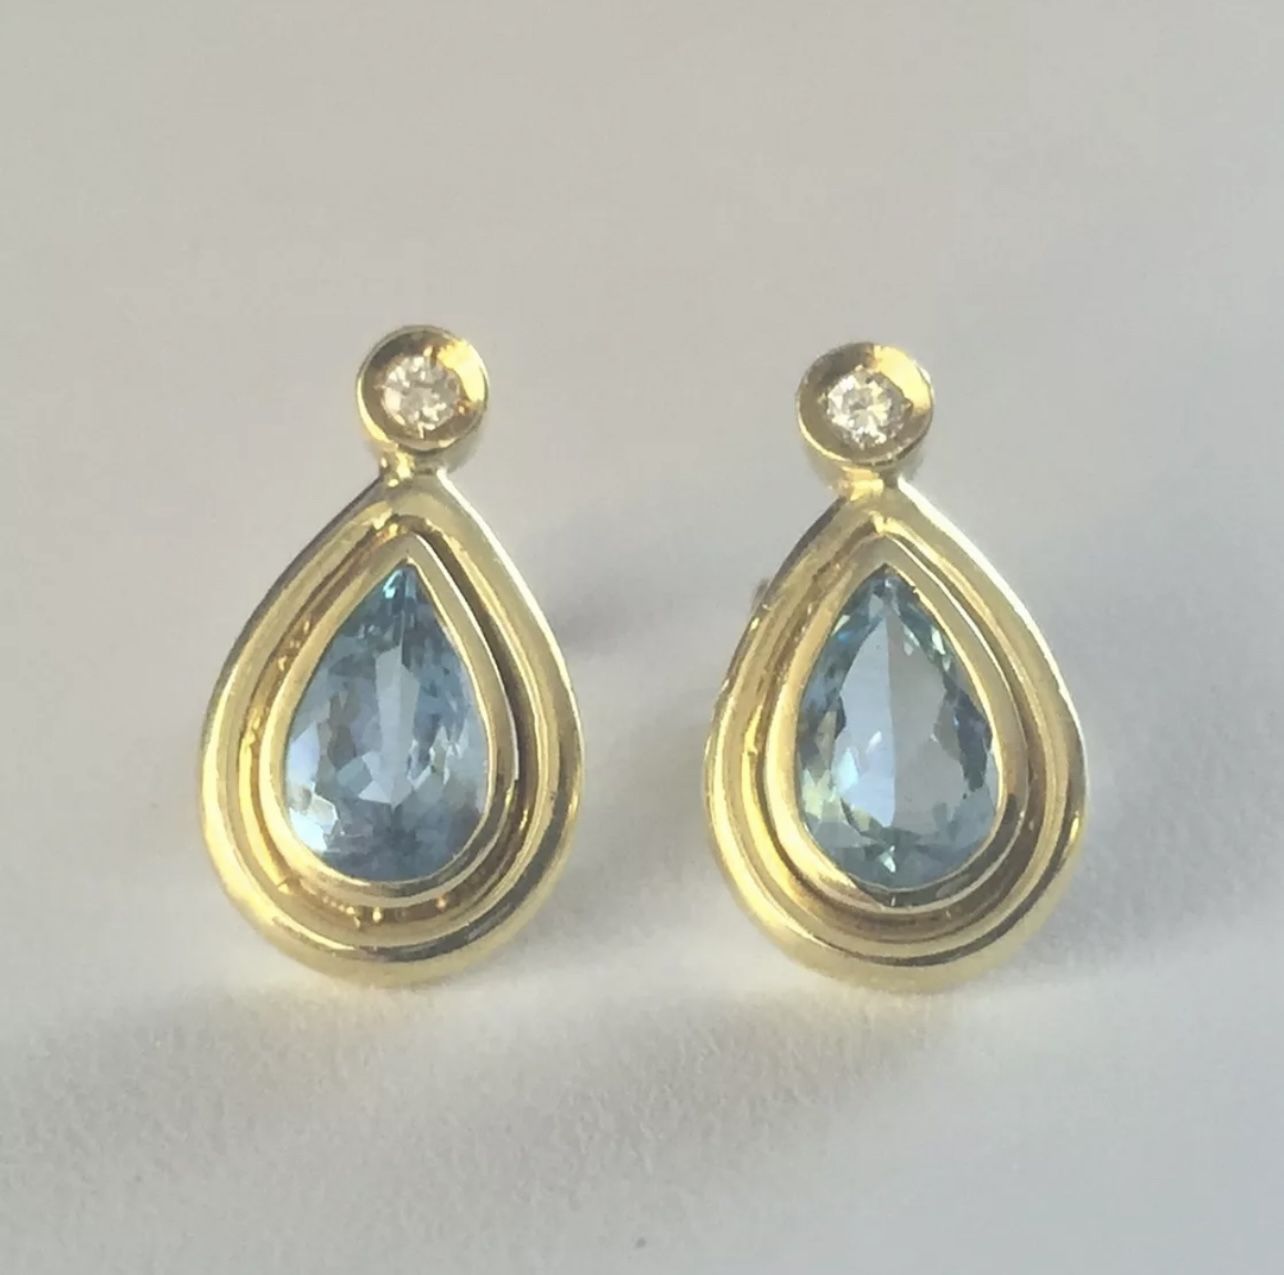 Elegant Ladies 14KT Yellow Gold Pear Shaped Blue Topaz and Round Diamond Earrings 4.0 Grams